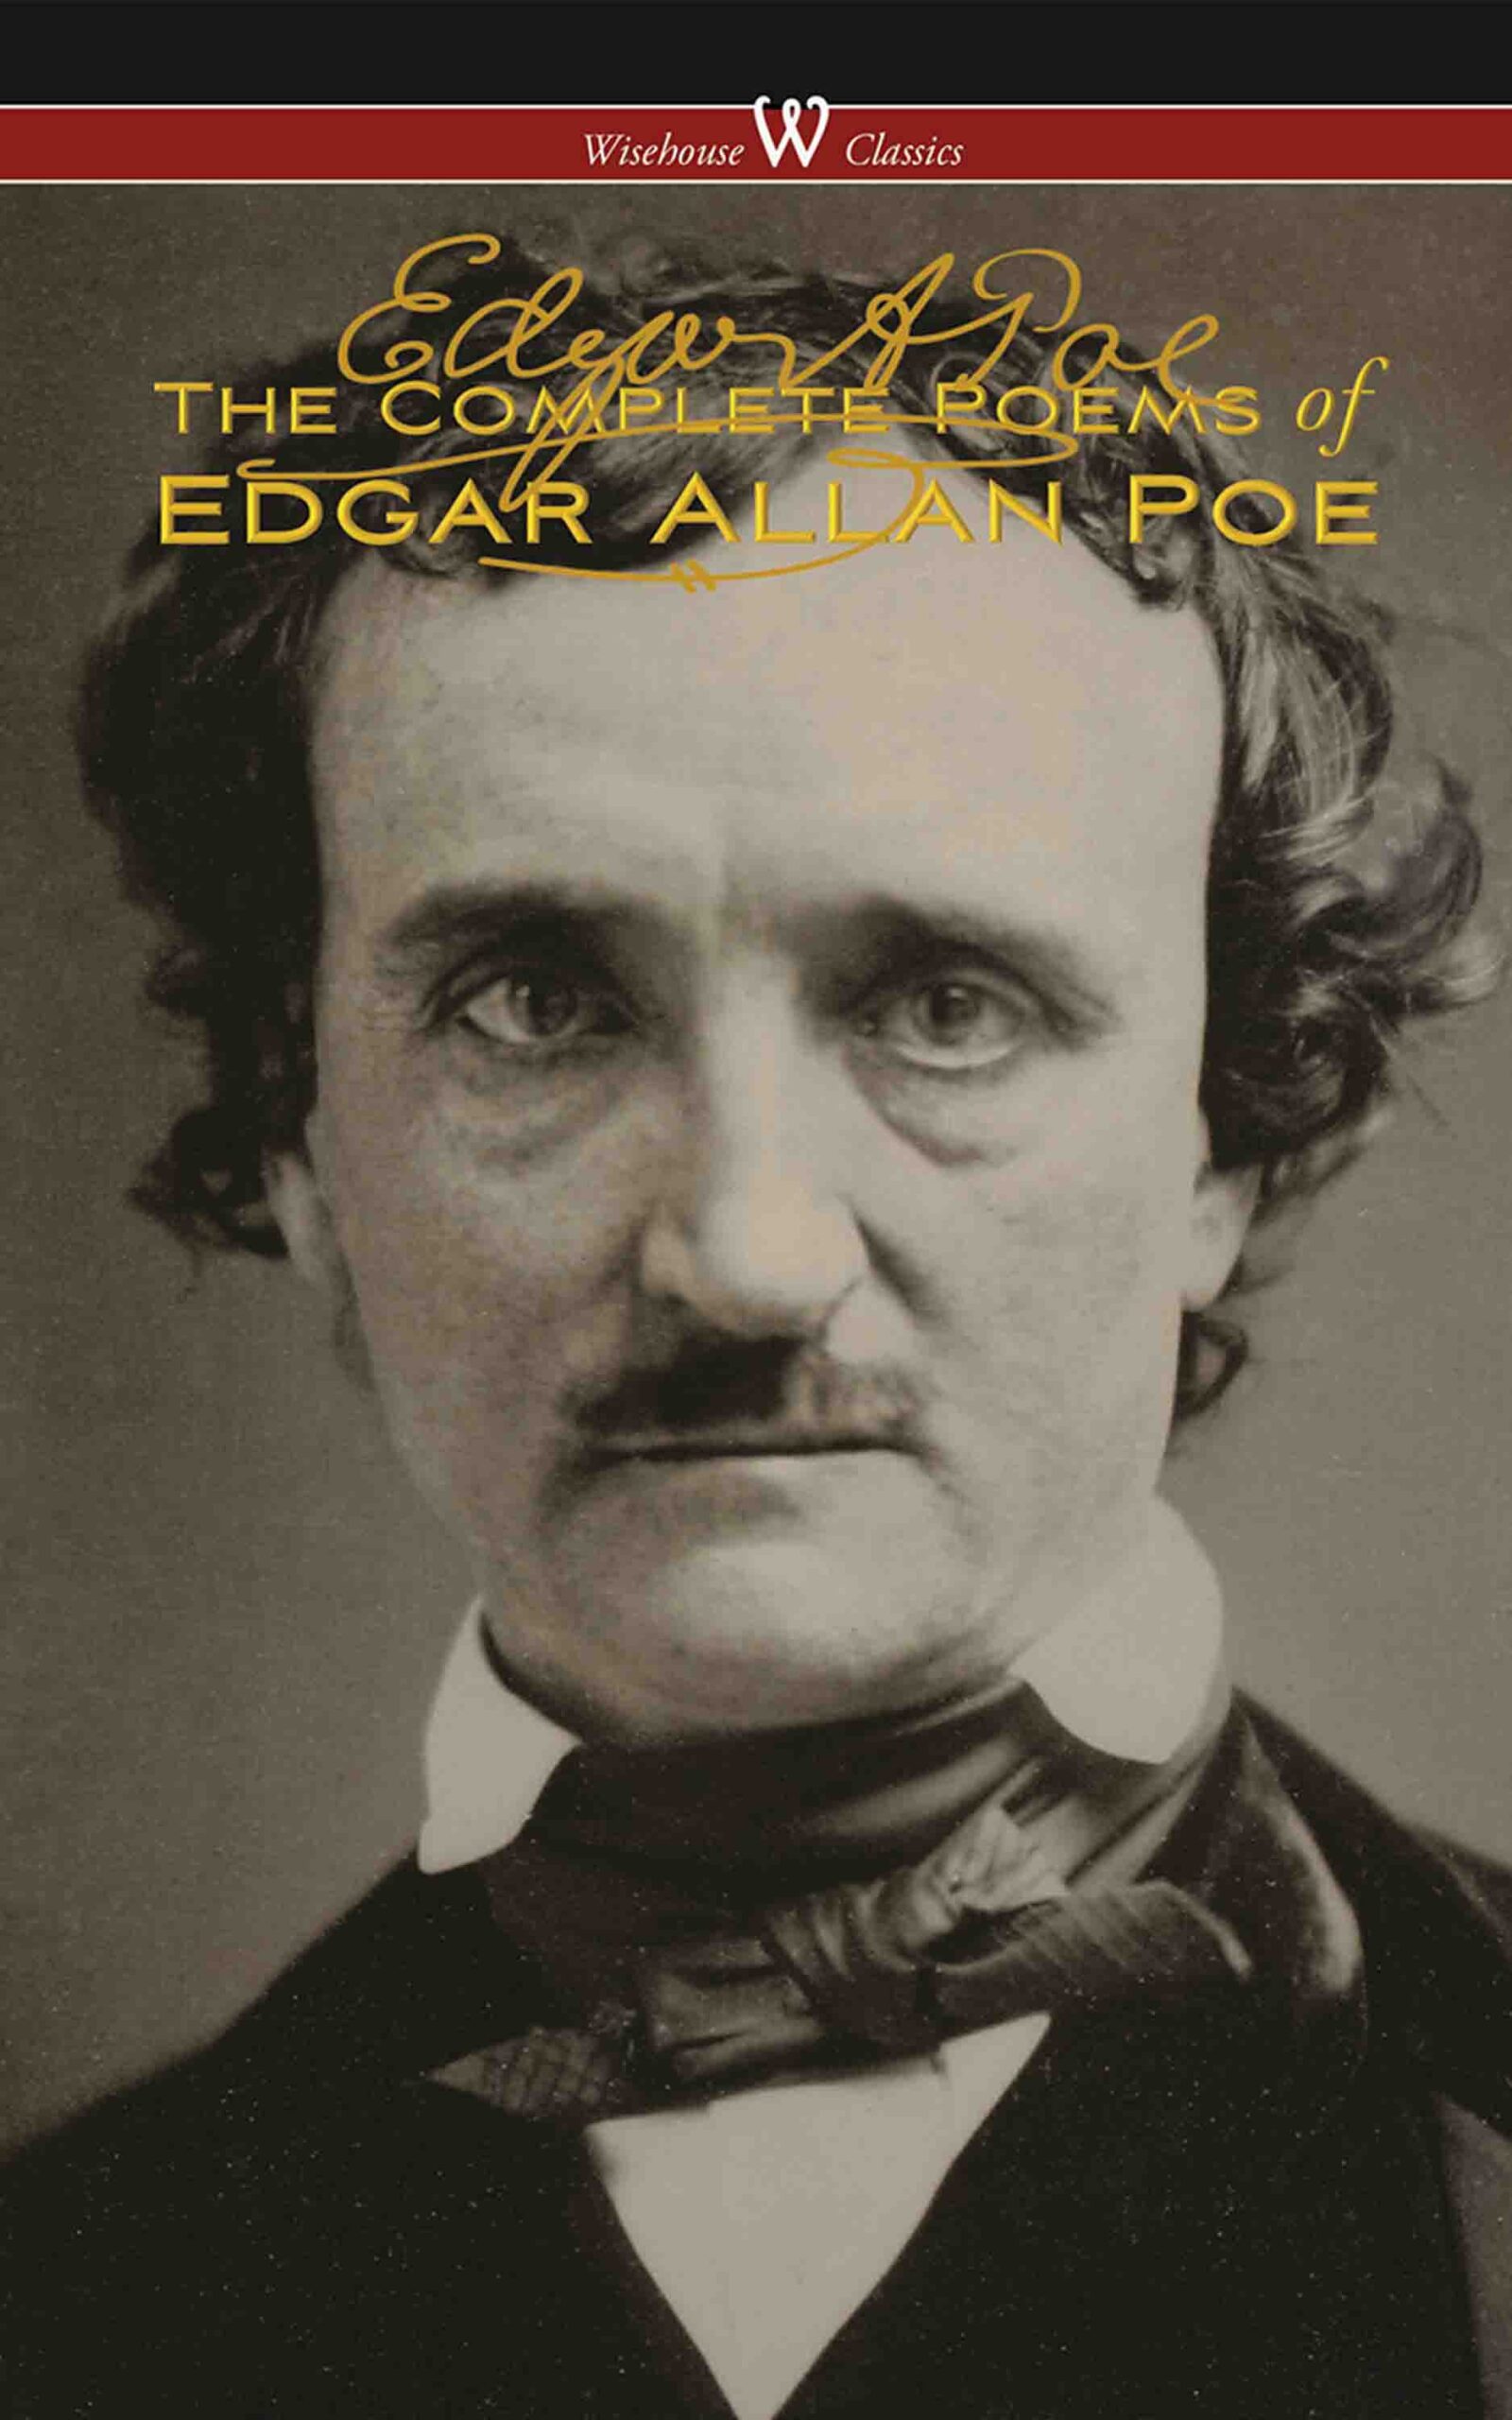 The Complete Poems of Edgar Allan Poe (The Authoritative Edition – Wisehouse Classics)